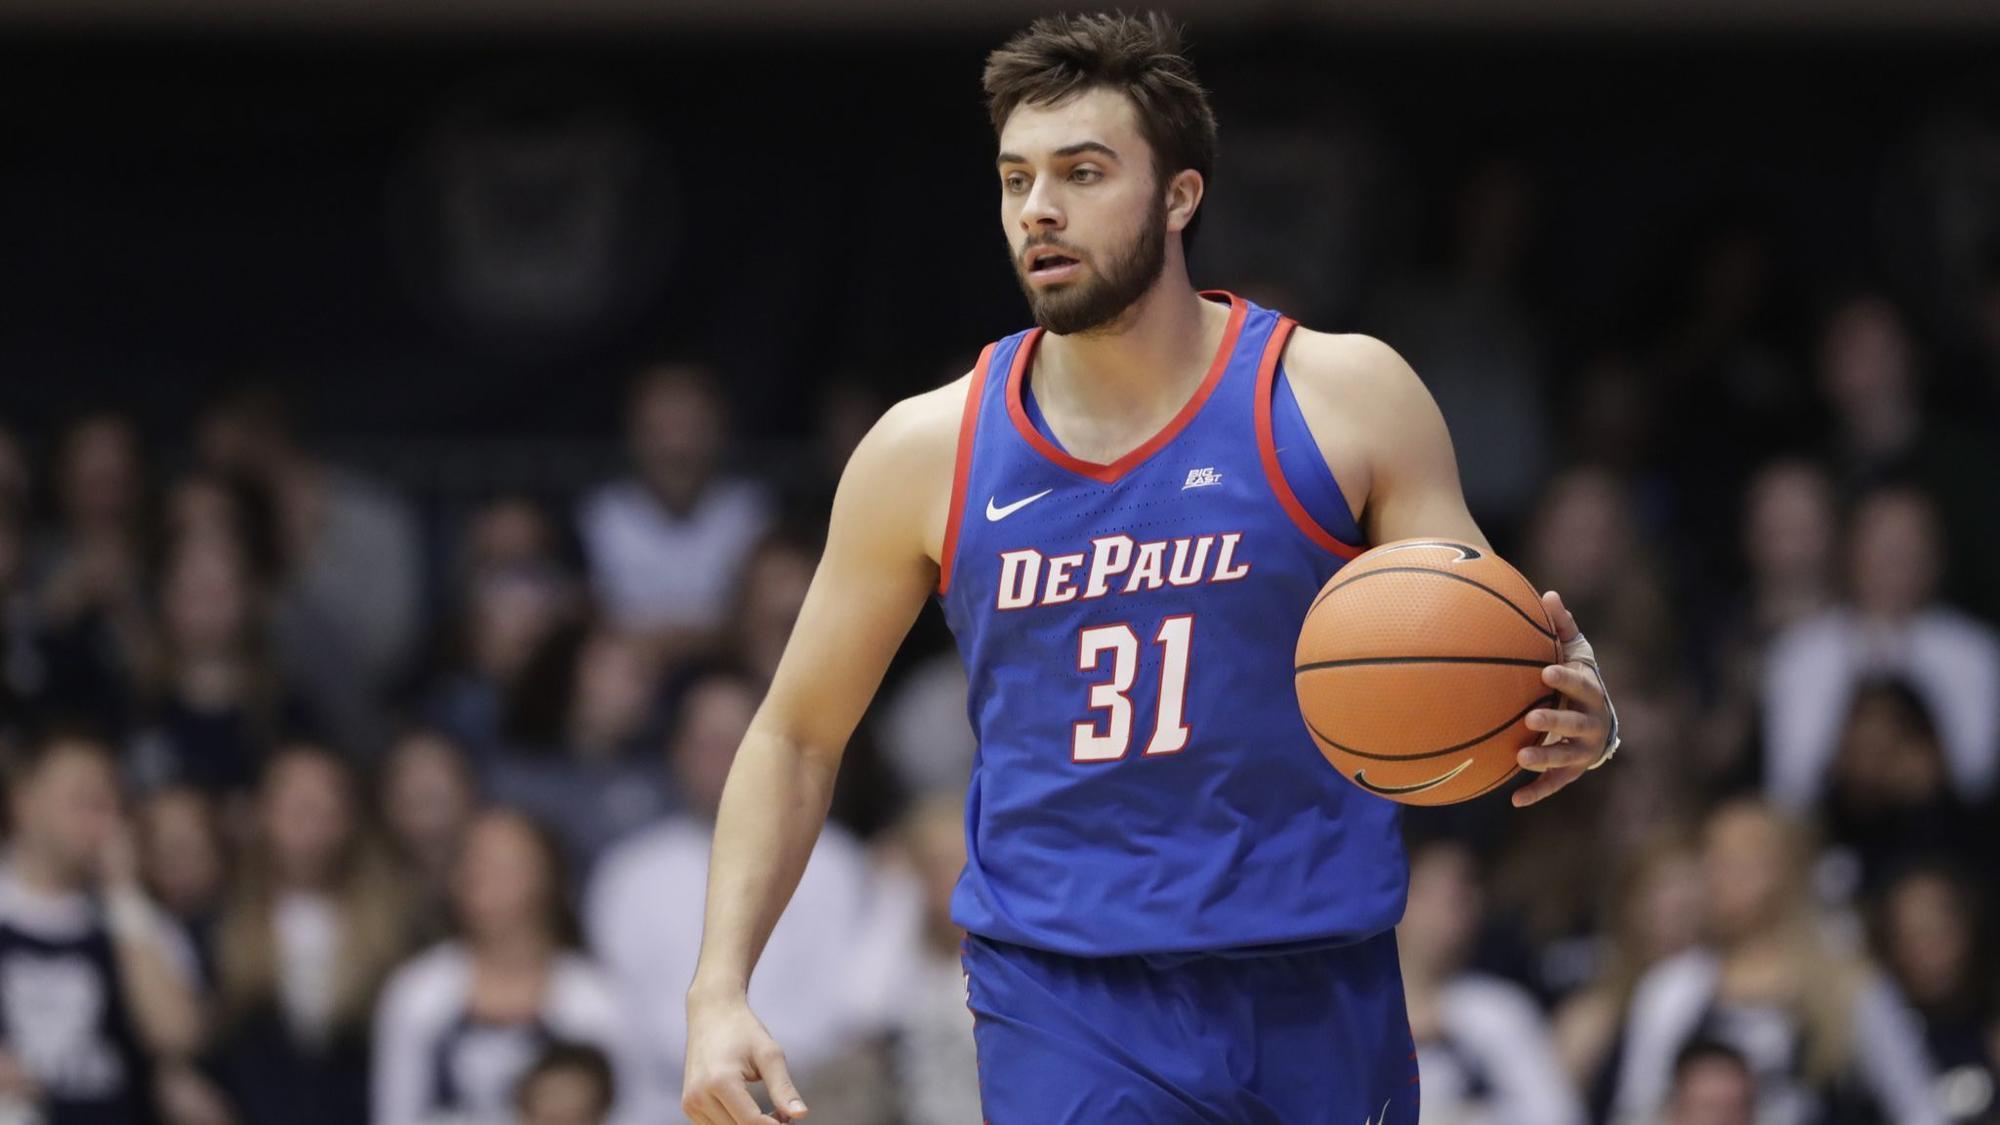 DePaul guard Max Strus to declare for NBA draft but won't hire agent - Chicago Tribune